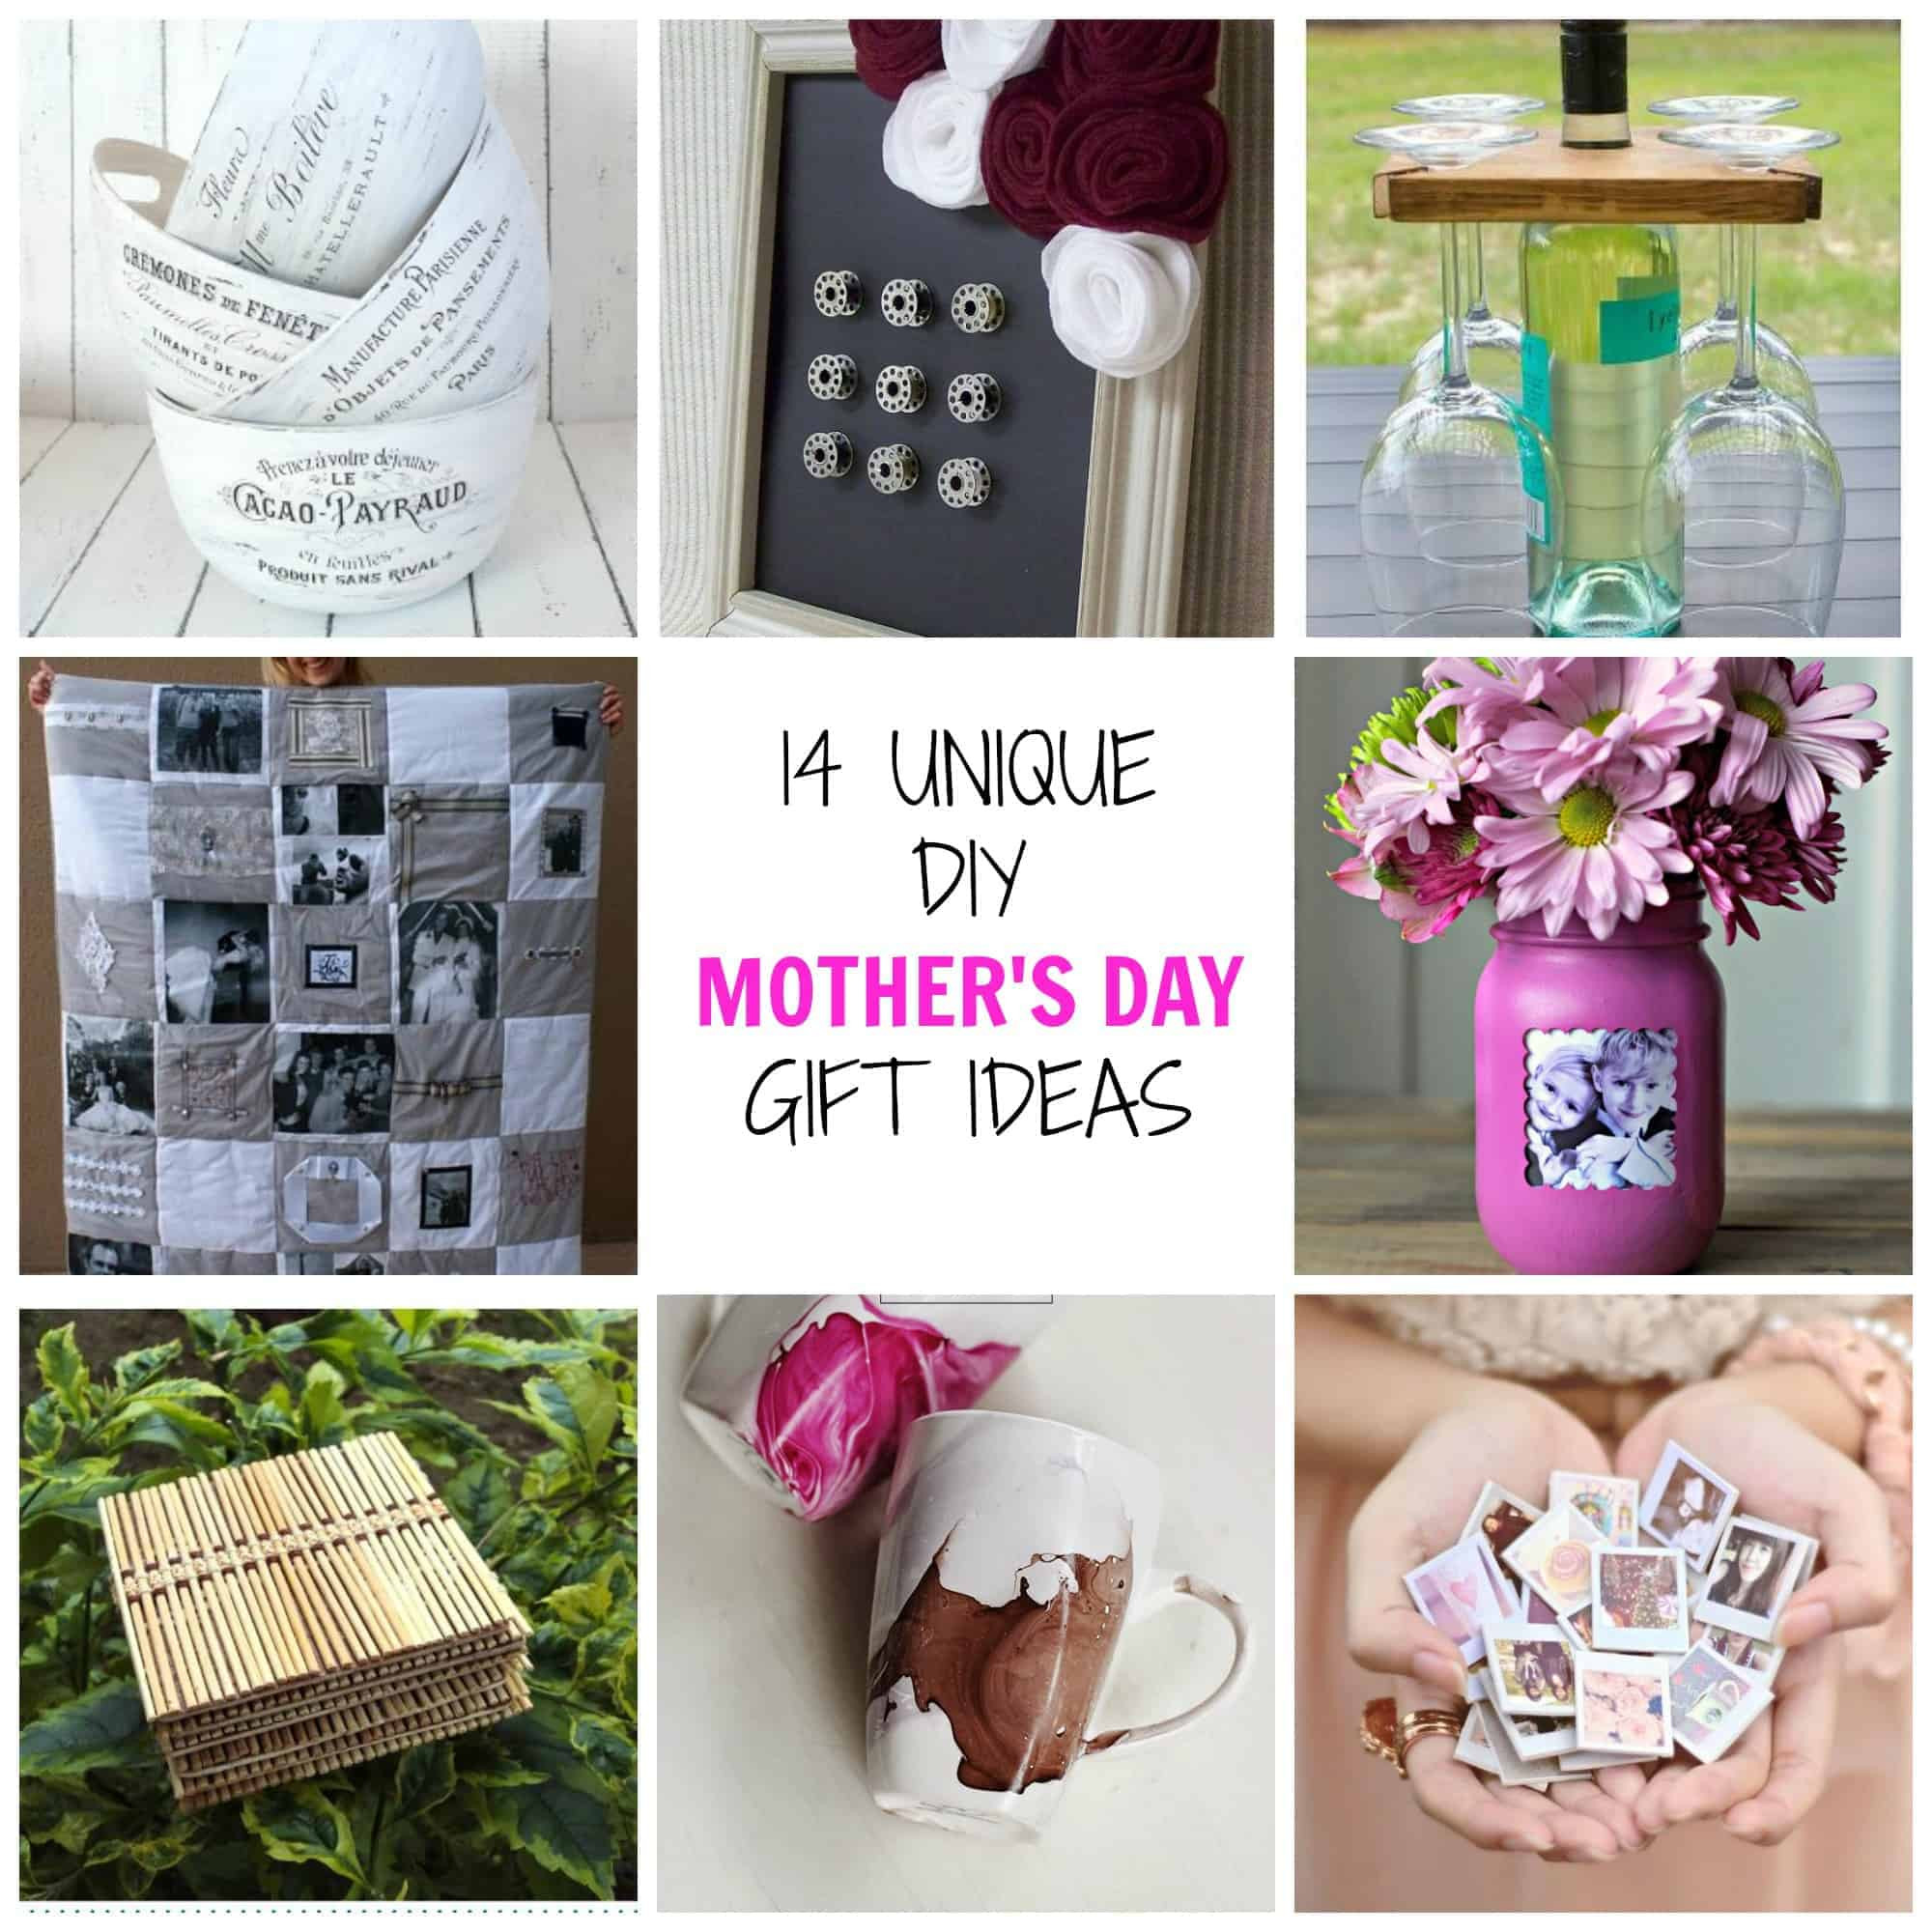 Unusual Mothers Day Gift Ideas
 14 Unique DIY Mother s Day Gifts Simplify Create Inspire